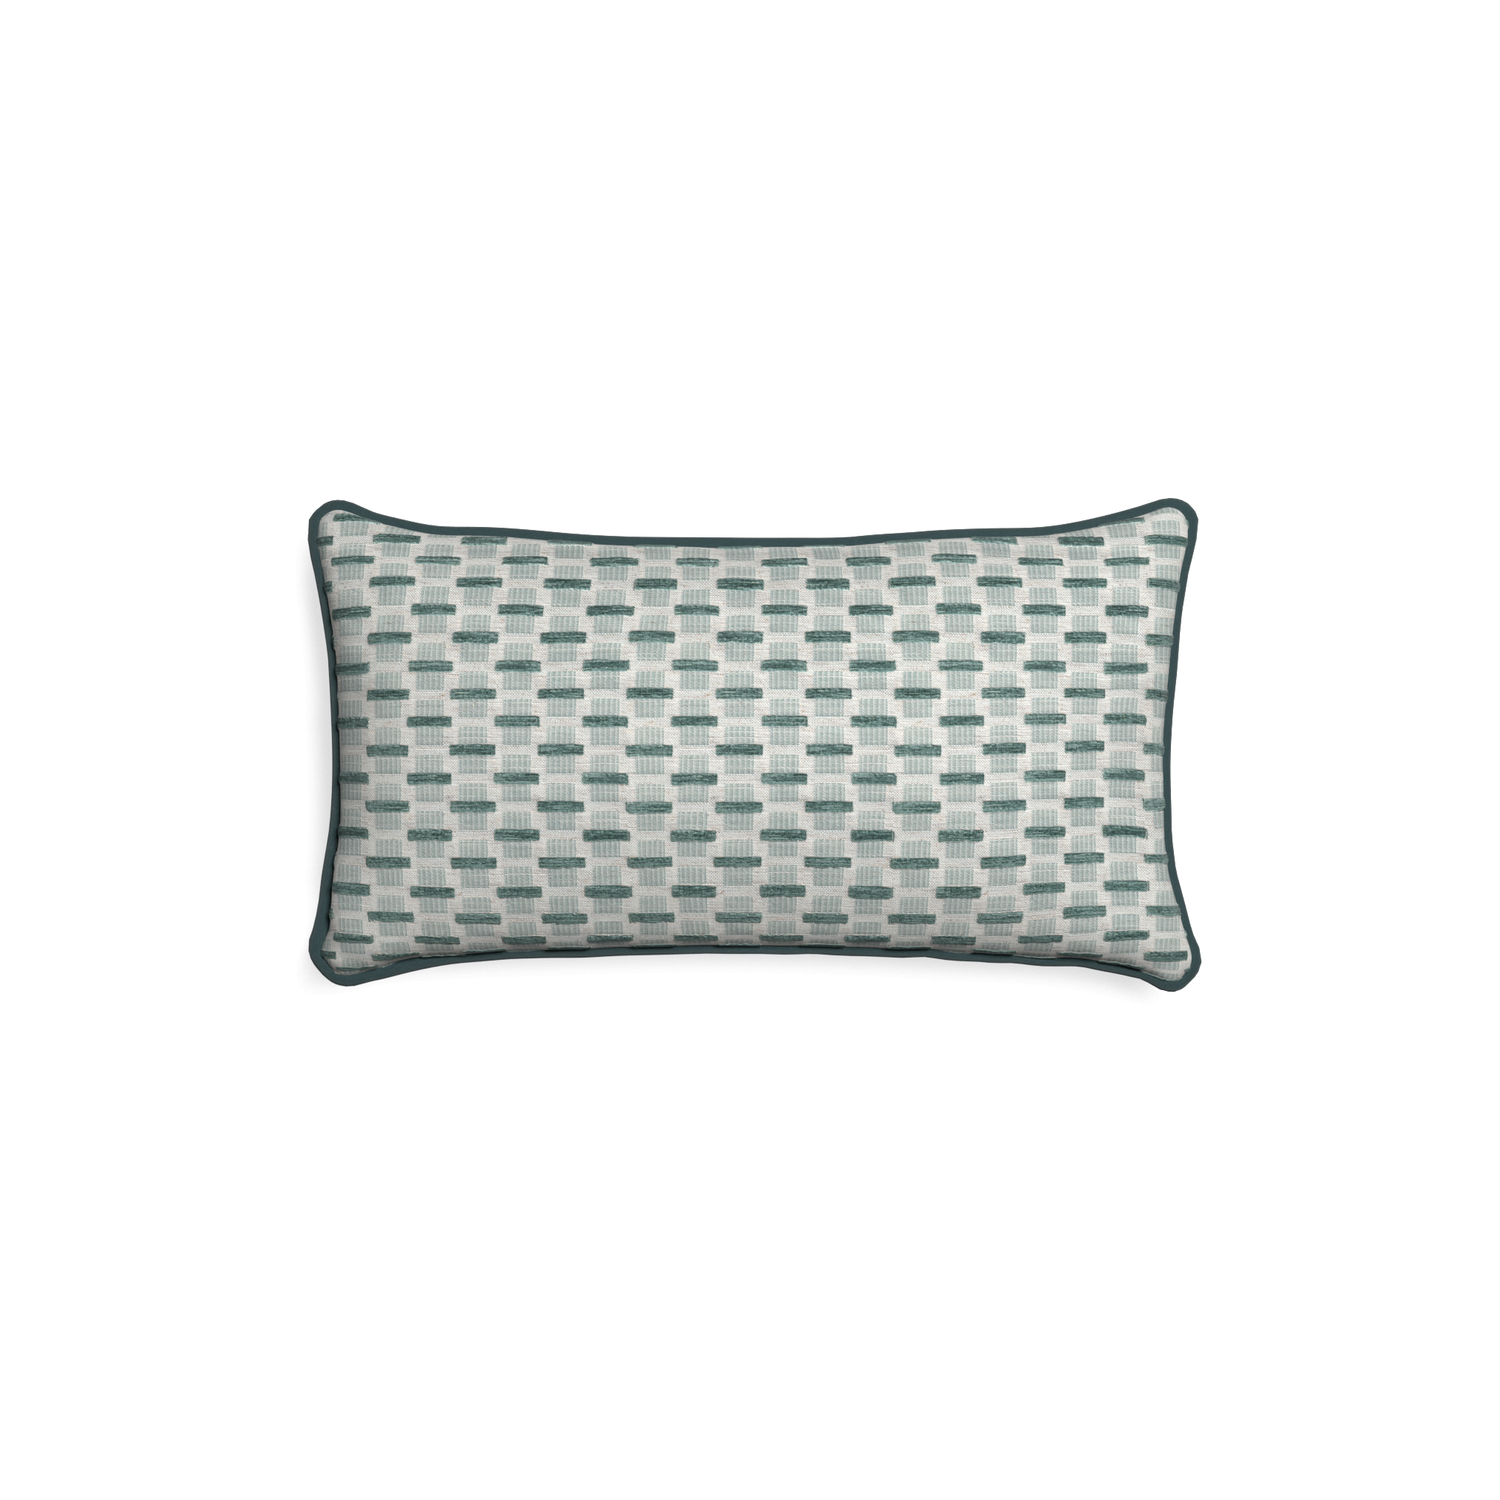 Petite-lumbar willow mint custom green geometric chenillepillow with p piping on white background